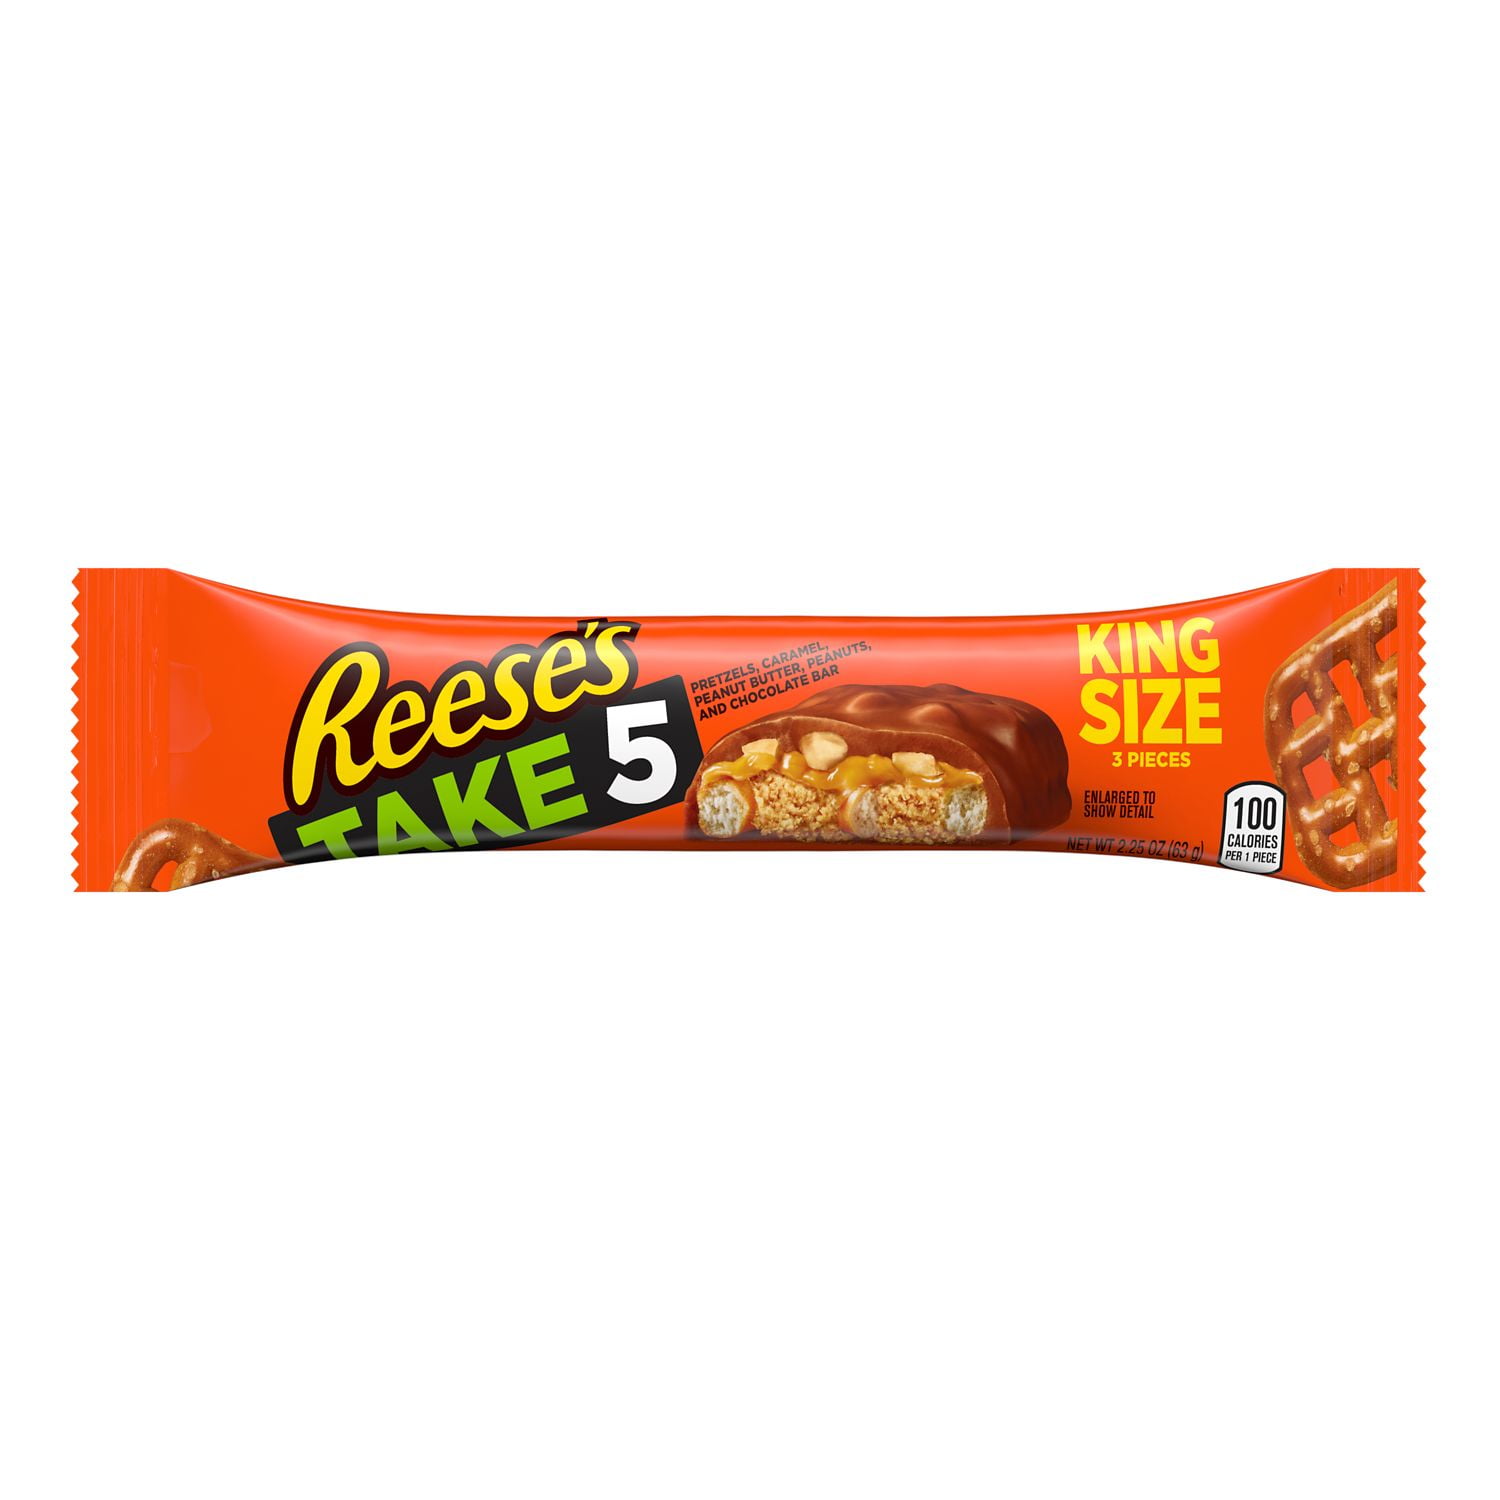 REESE'S, TAKE 5 Pretzel, Caramel, Peanut Butter, Peanut and Chocolate Candy Bars, Individually Wrapped, 2.25 oz, King Size Pack